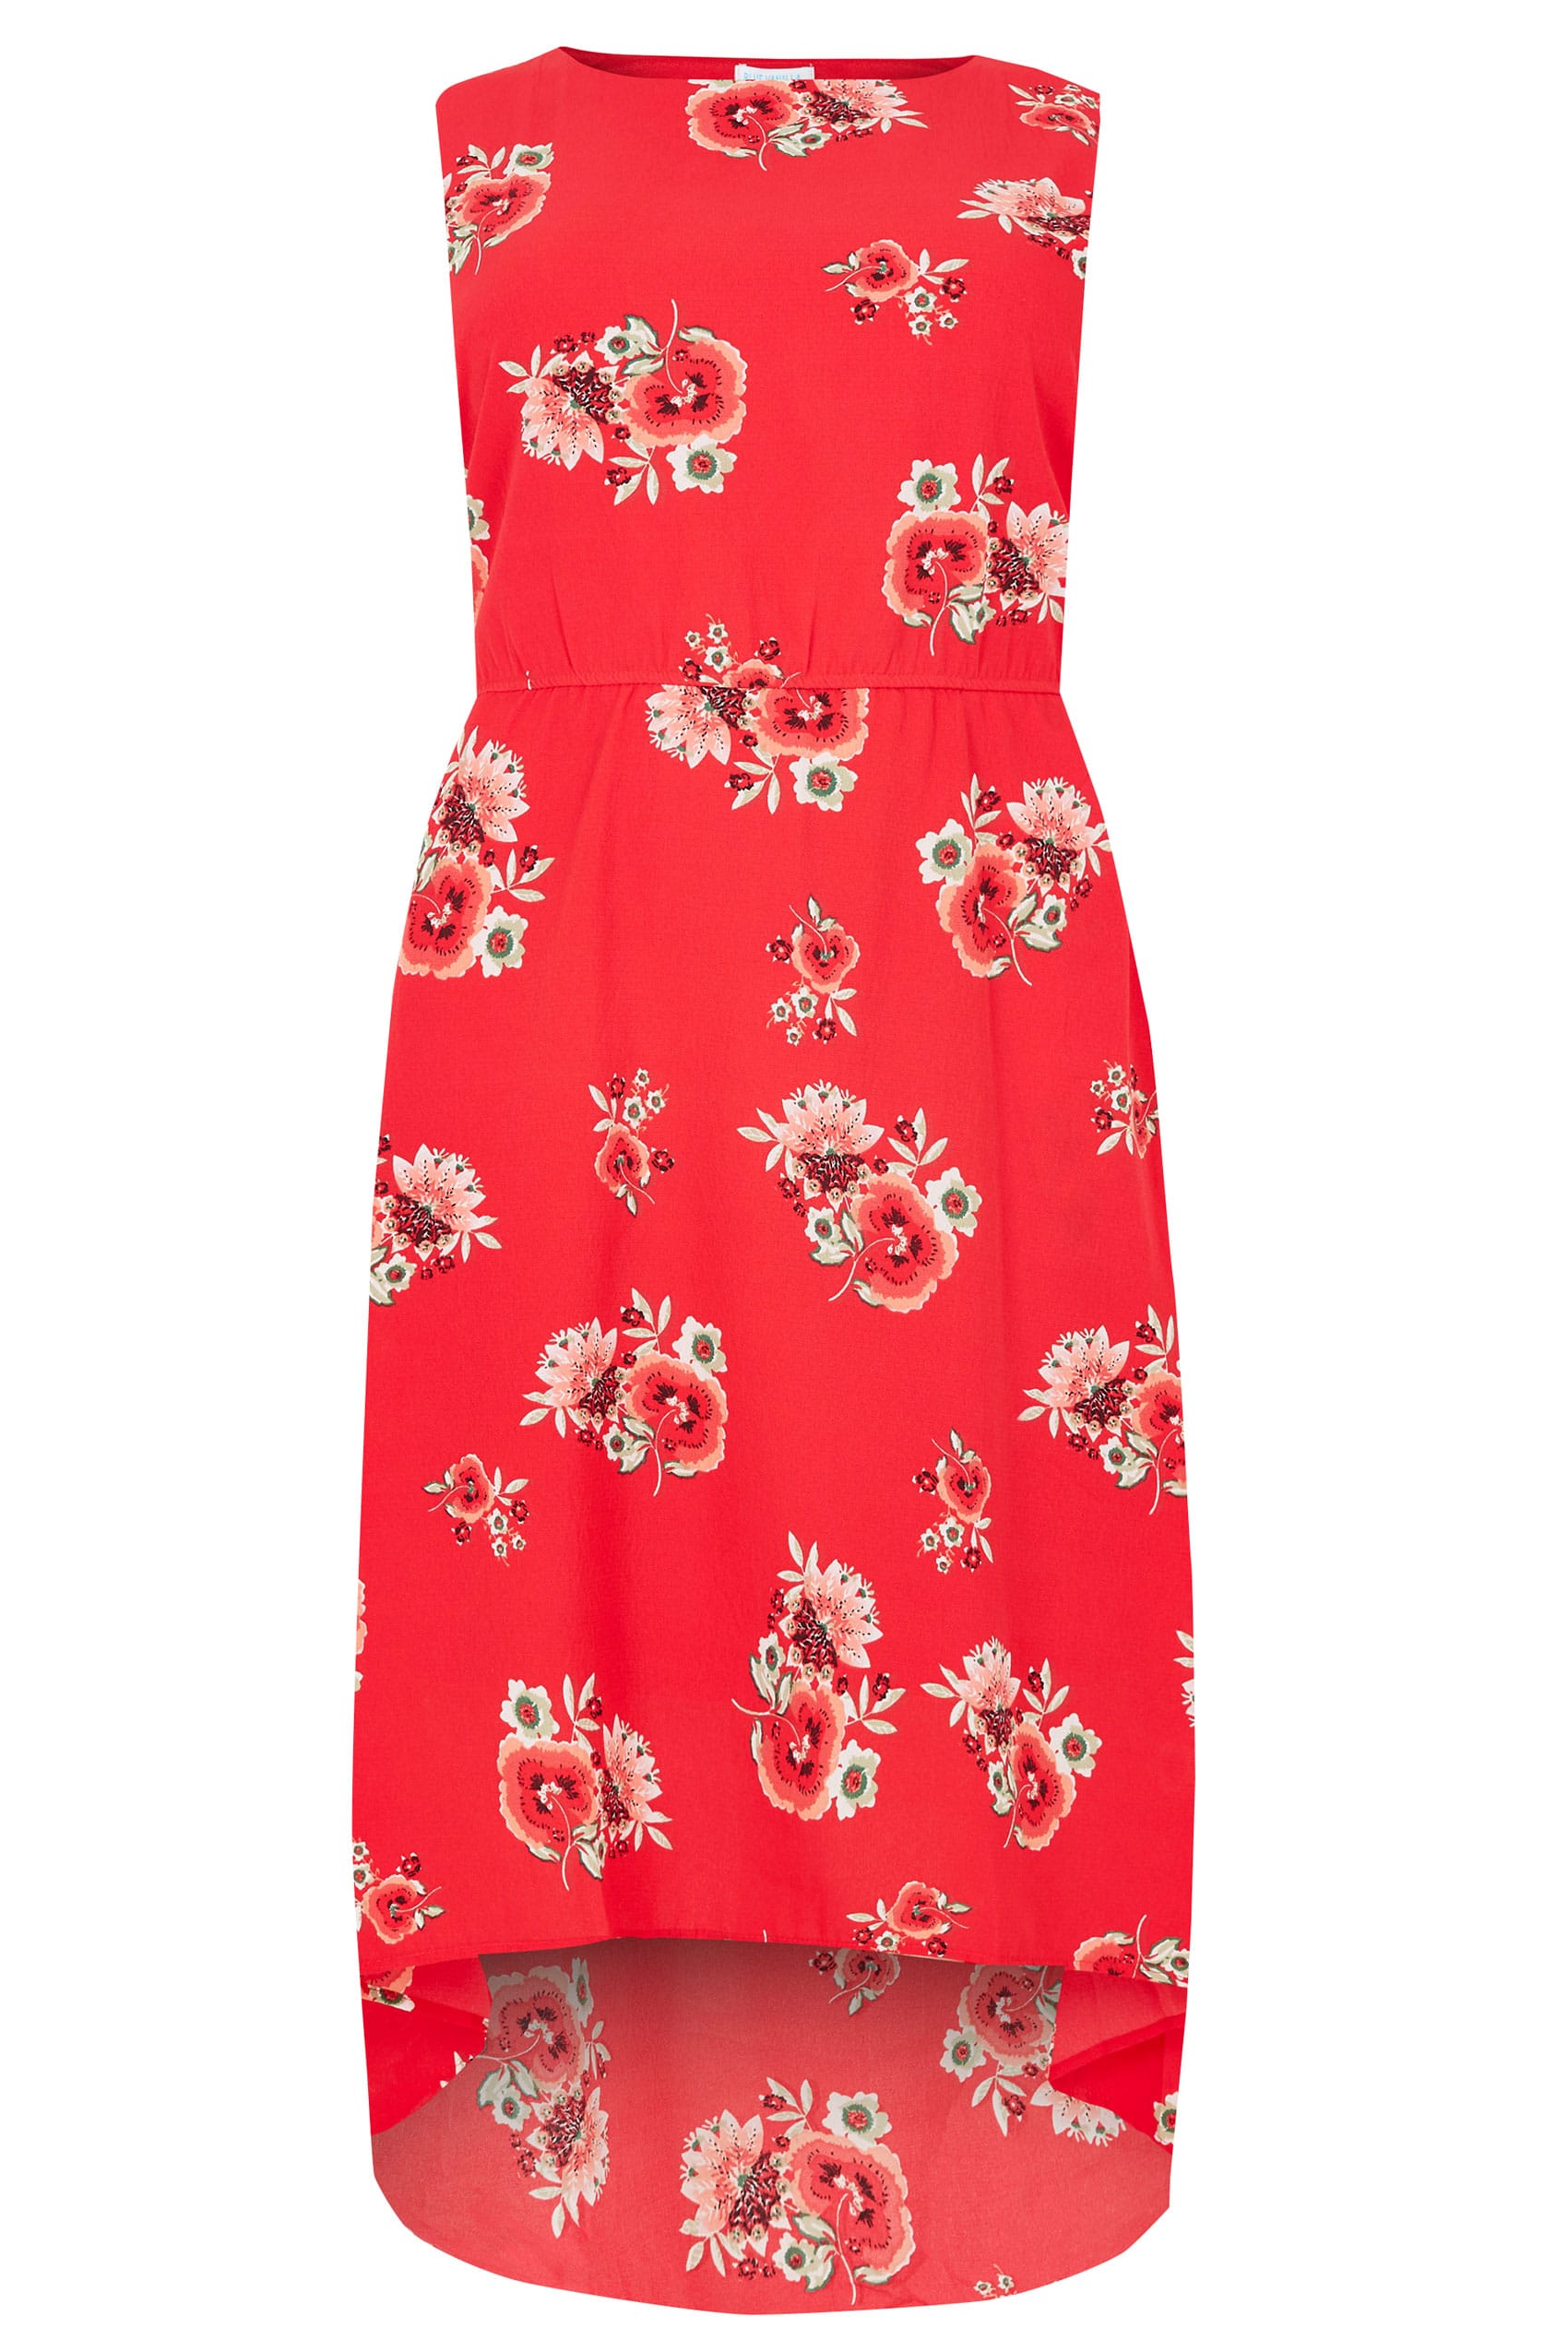 BLUE VANILLA CURVE Red Floral Print High Low Dress, plus size 16 to 36